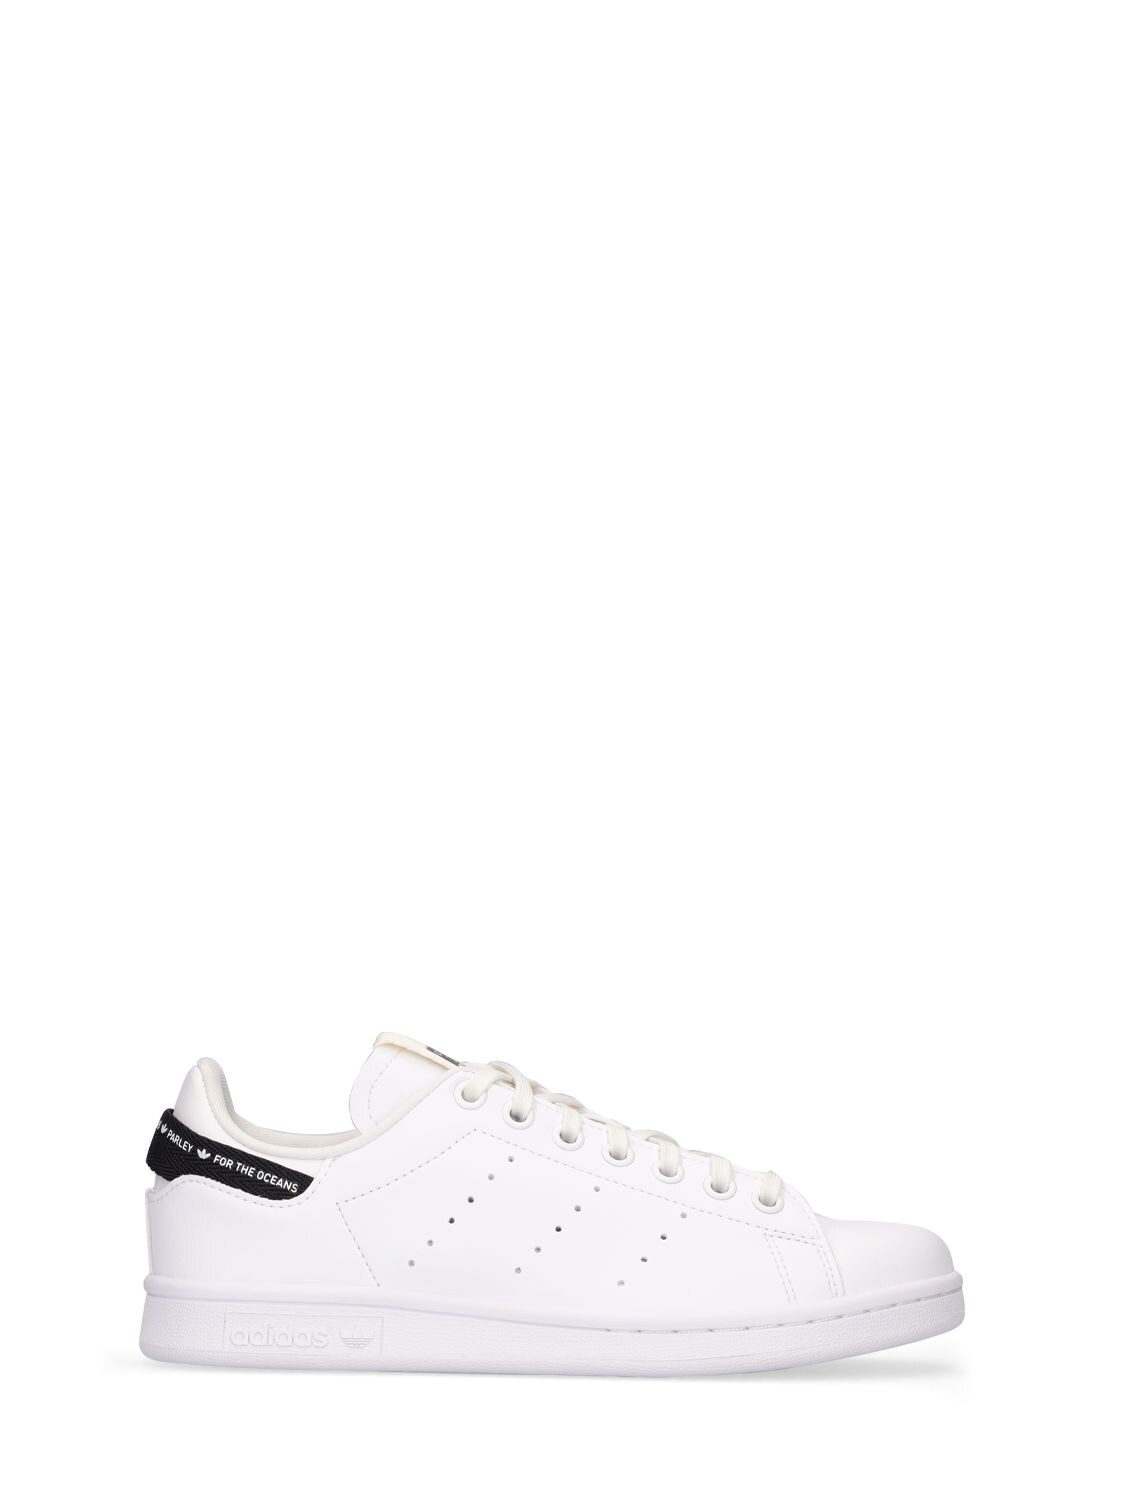 ADIDAS ORIGINALS STAN SMITH J LACE-UP SNEAKERS